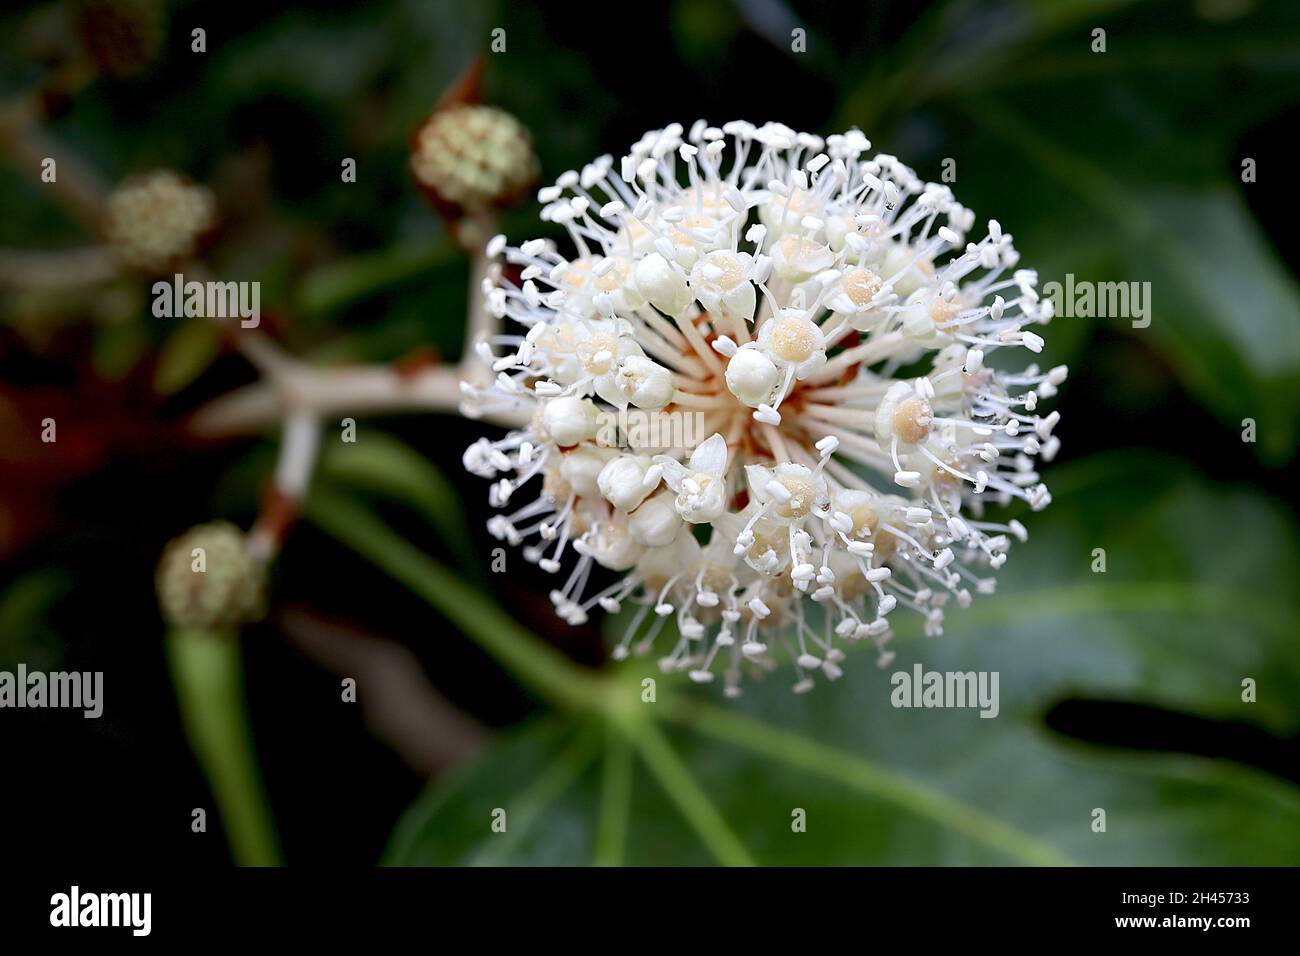 Fatsia japonica Caster oil plant or Paper plant – spherical umbels of tiny white flowers,   October, England, UK Stock Photo